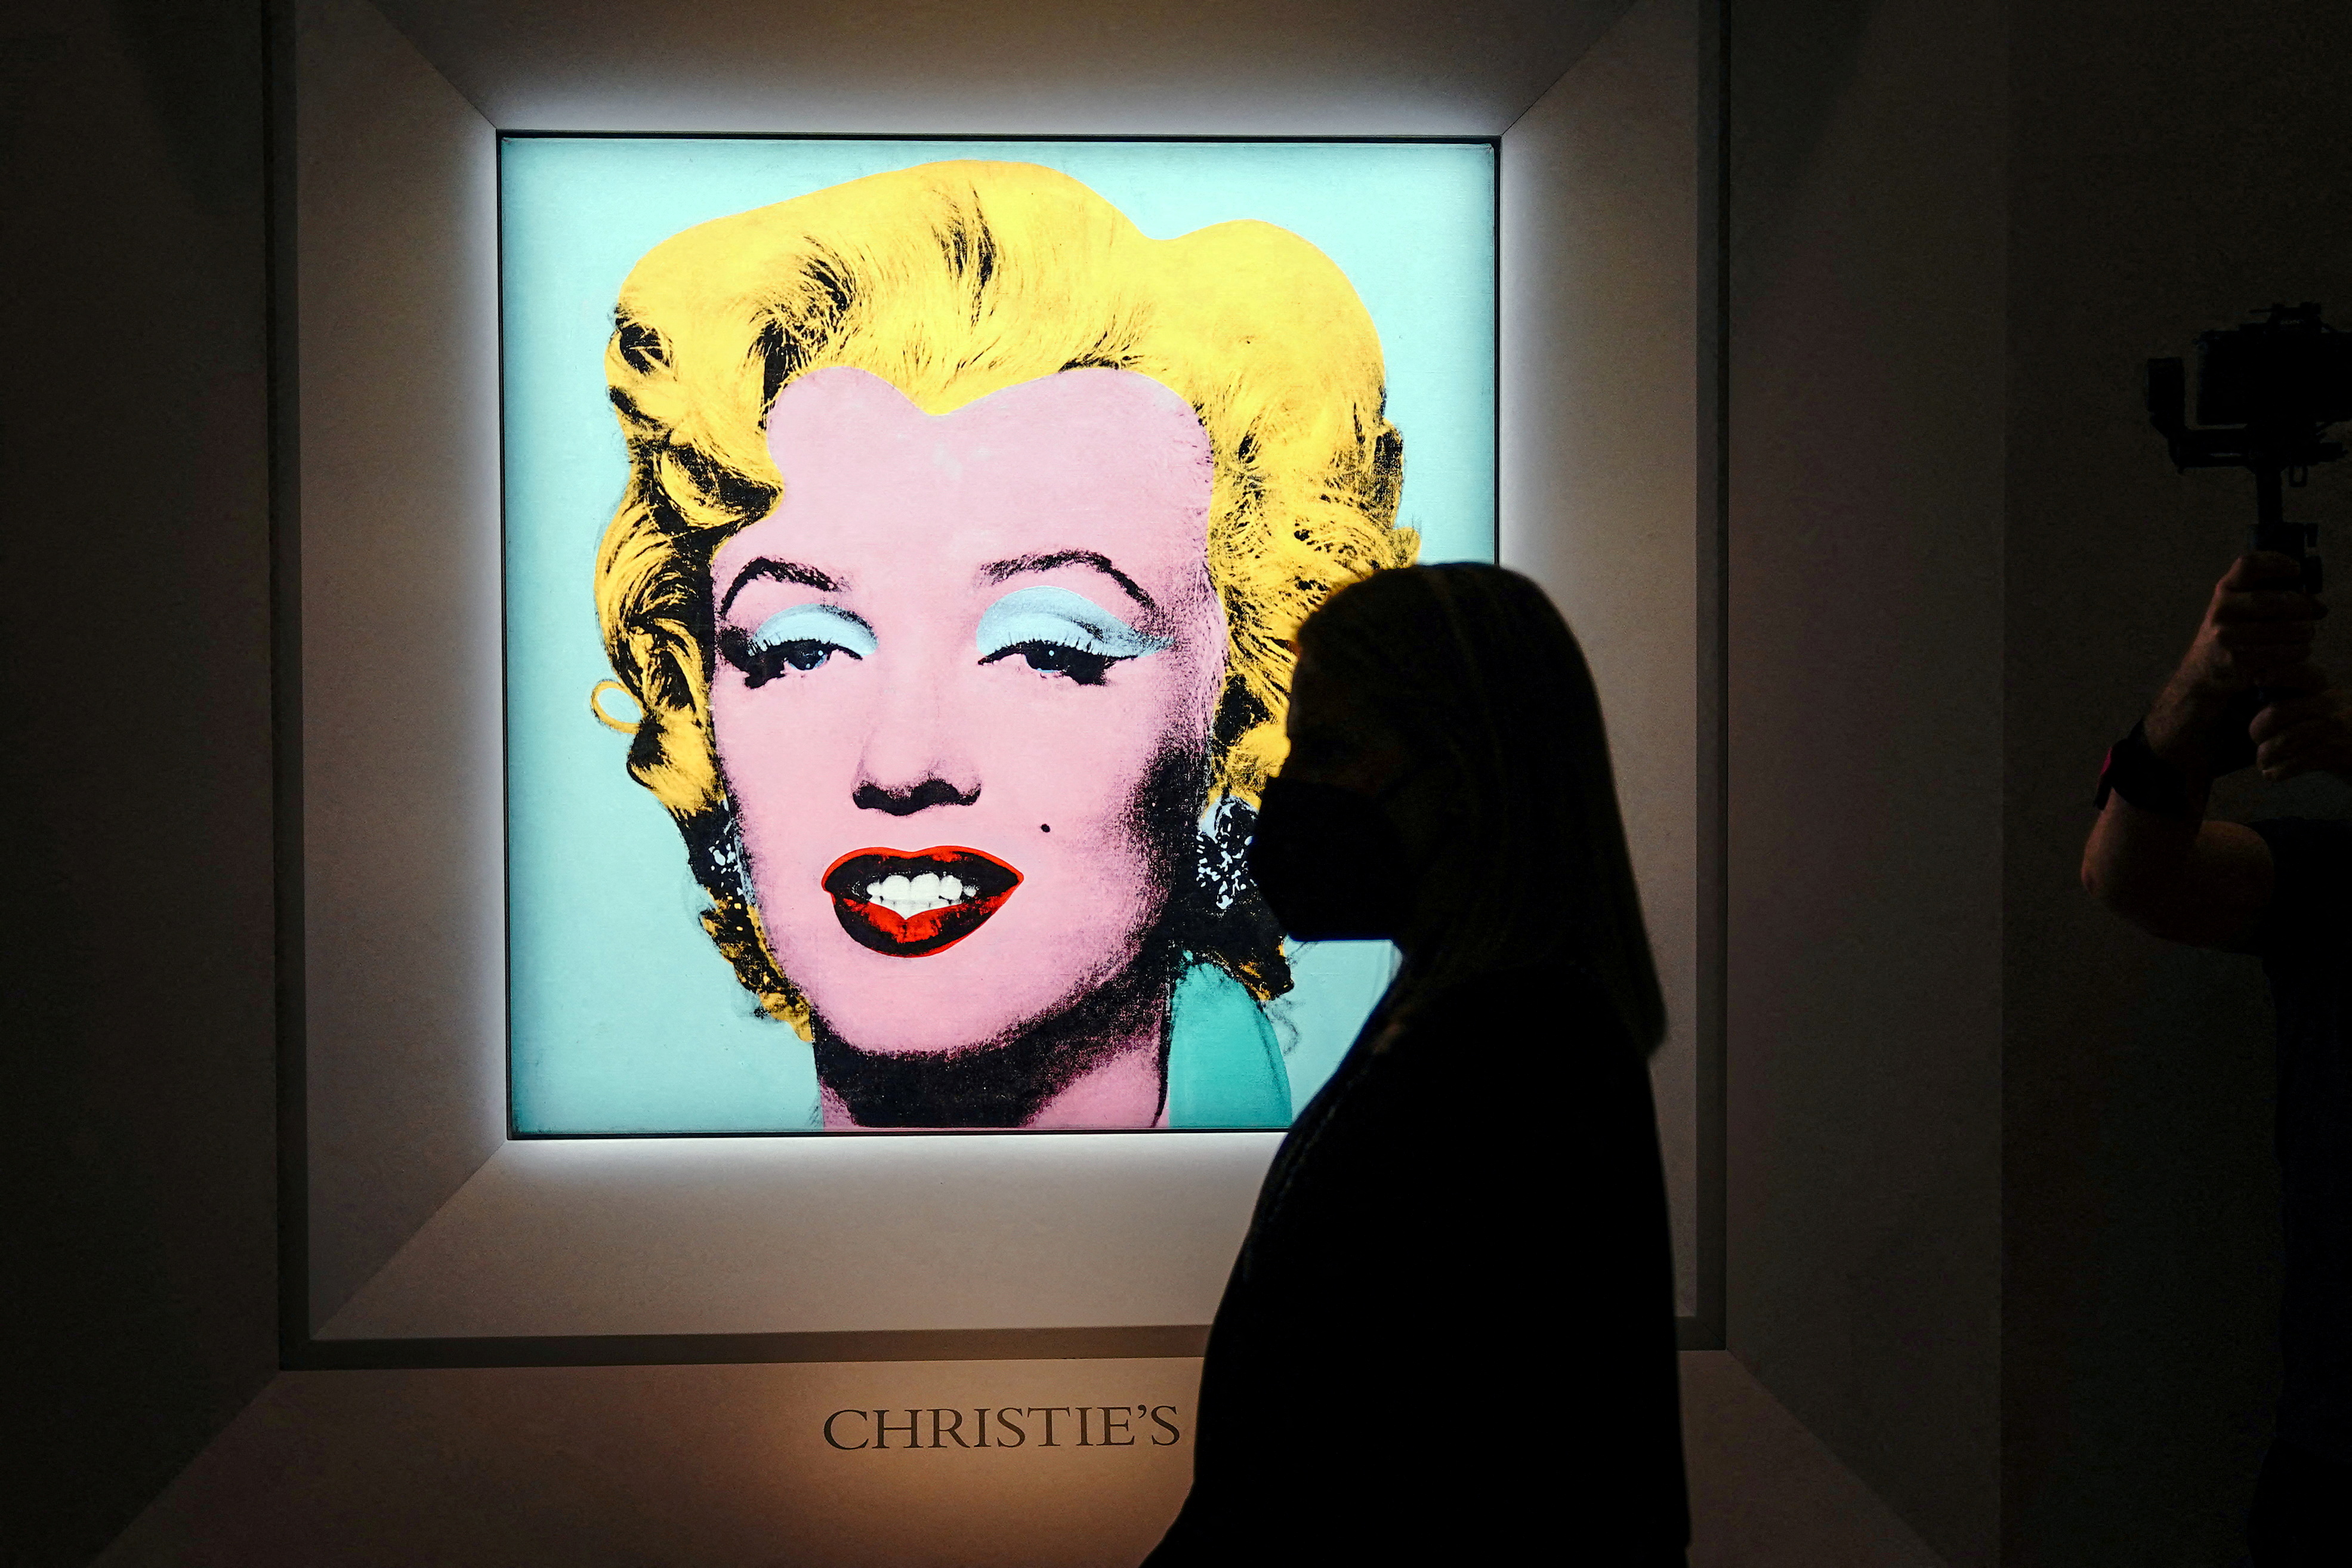  "Shot Sage Blue Marilyn" it is now the second most expensive work sold at auction (REUTERS)